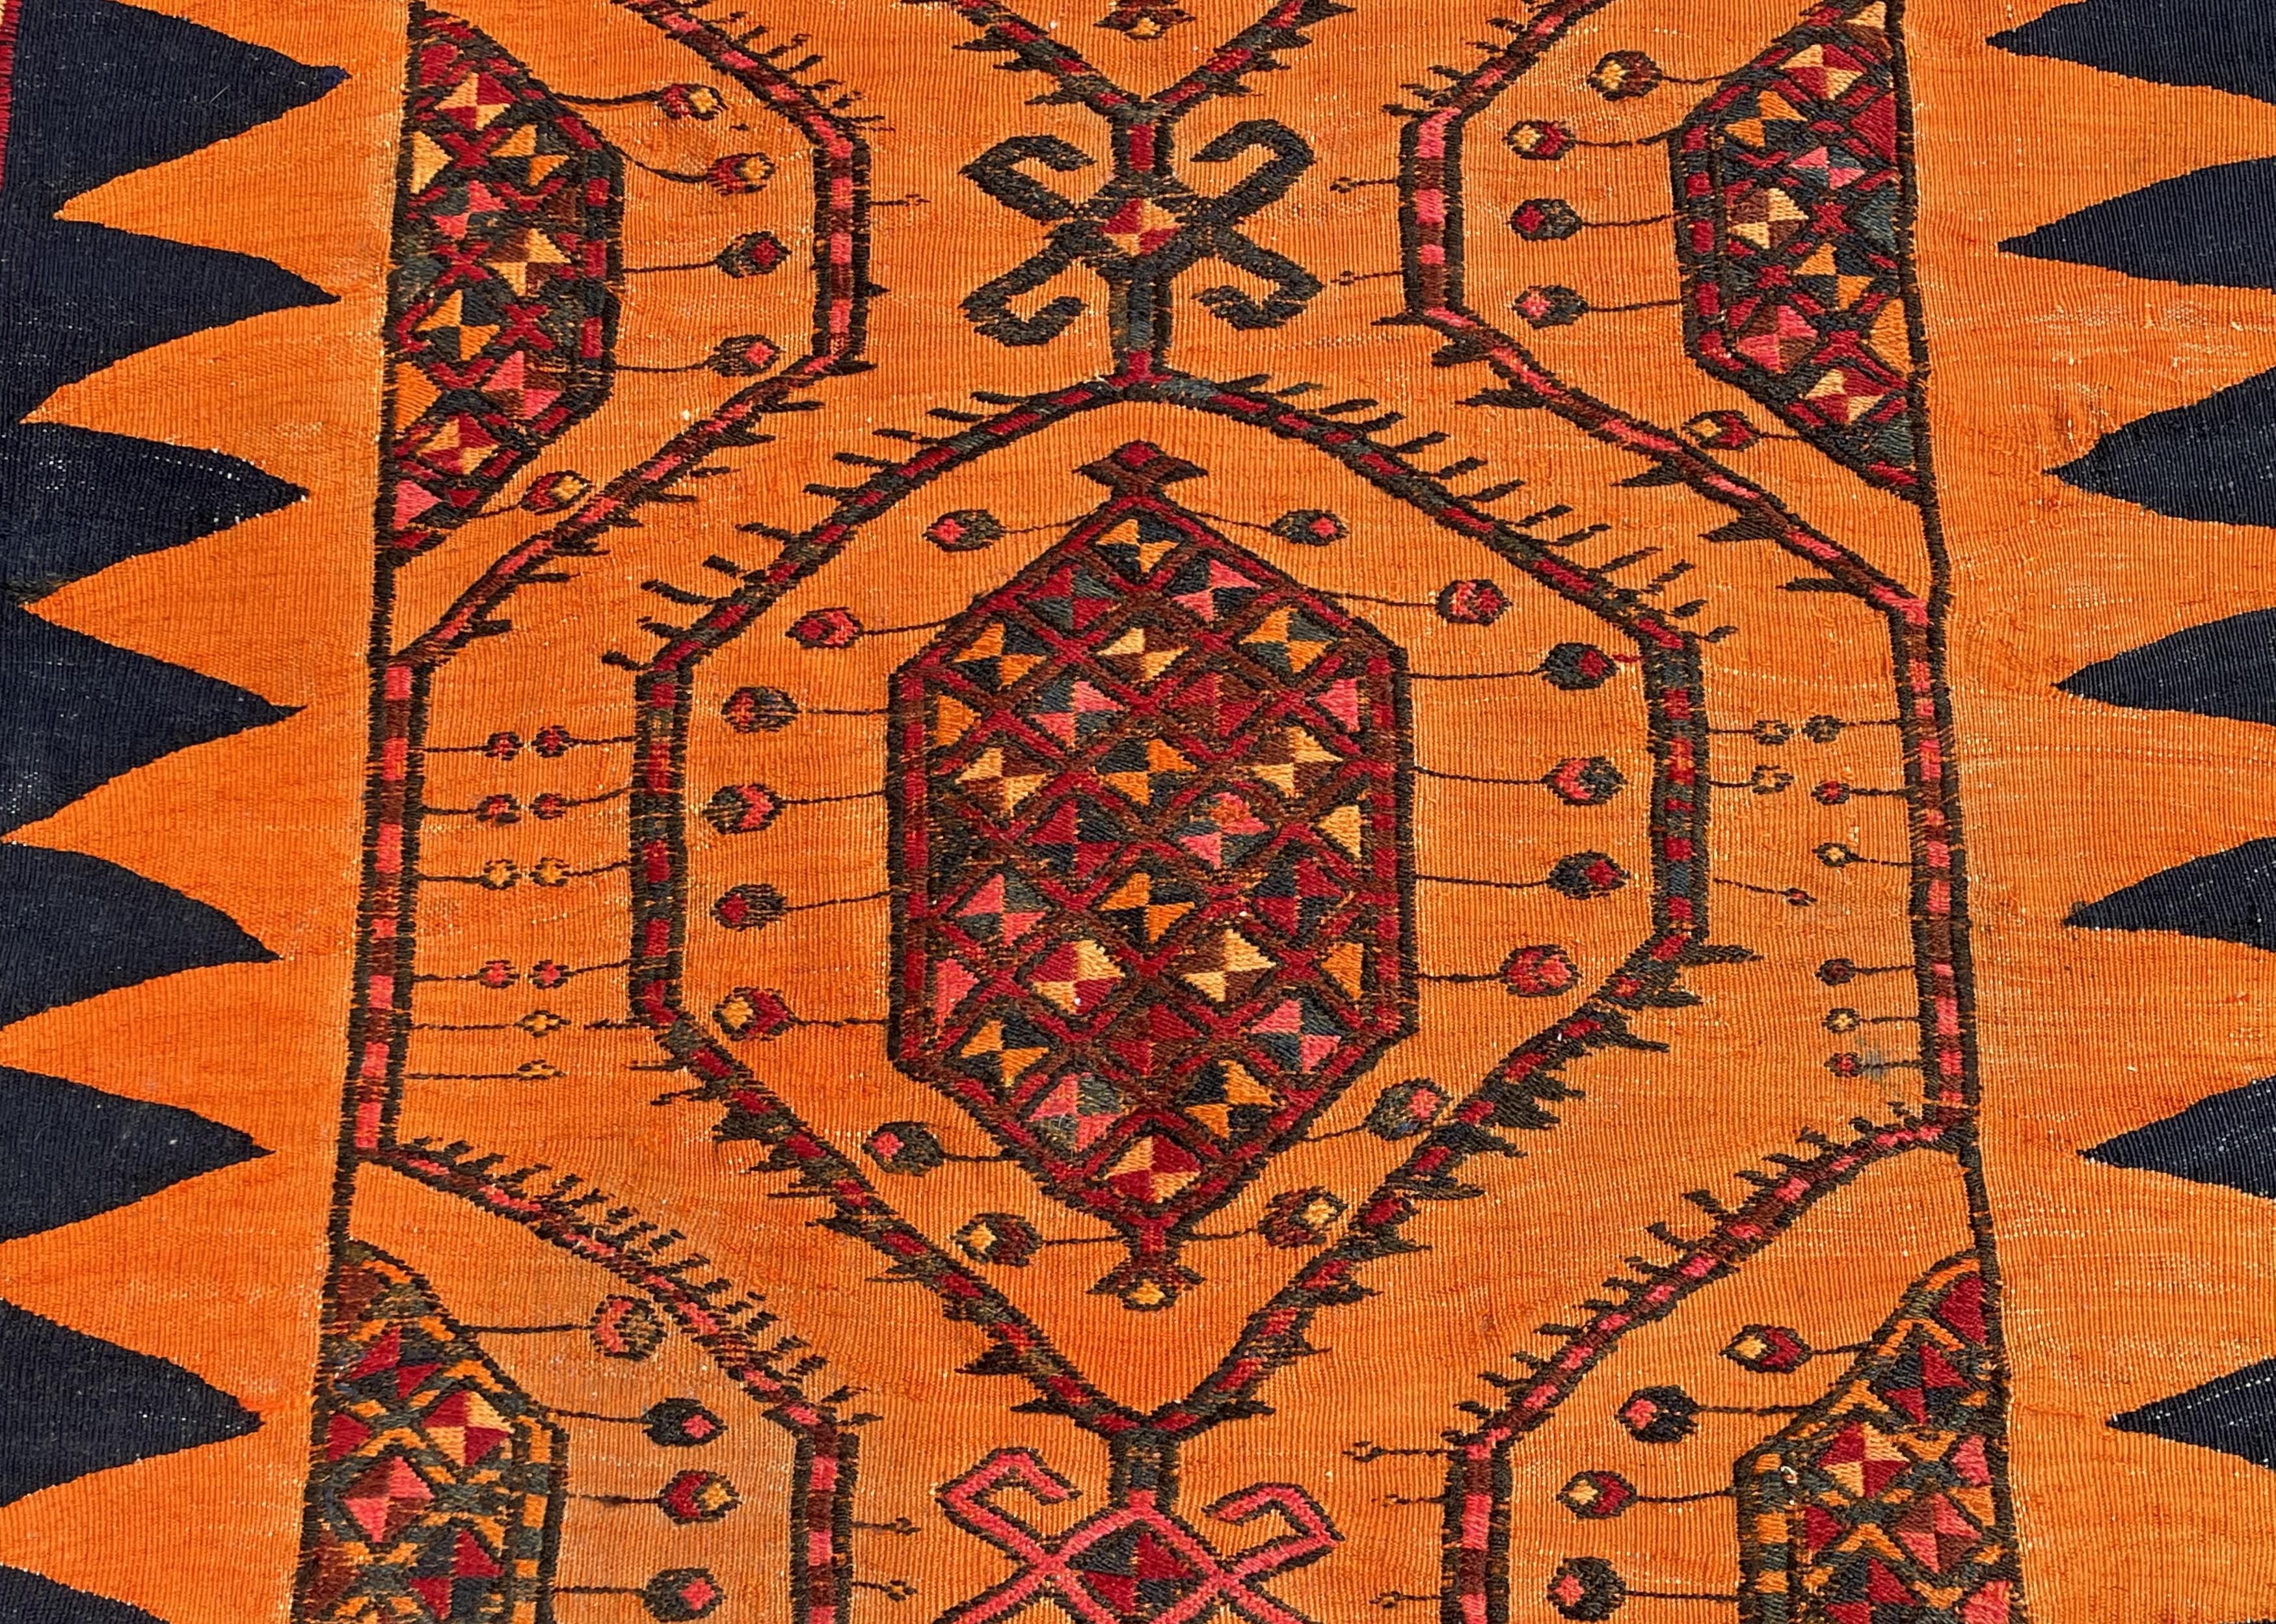 Wool Stunning & Large Size Hand Knotted Kilim Rug Midcentury Design w. Vibrant Colors For Sale